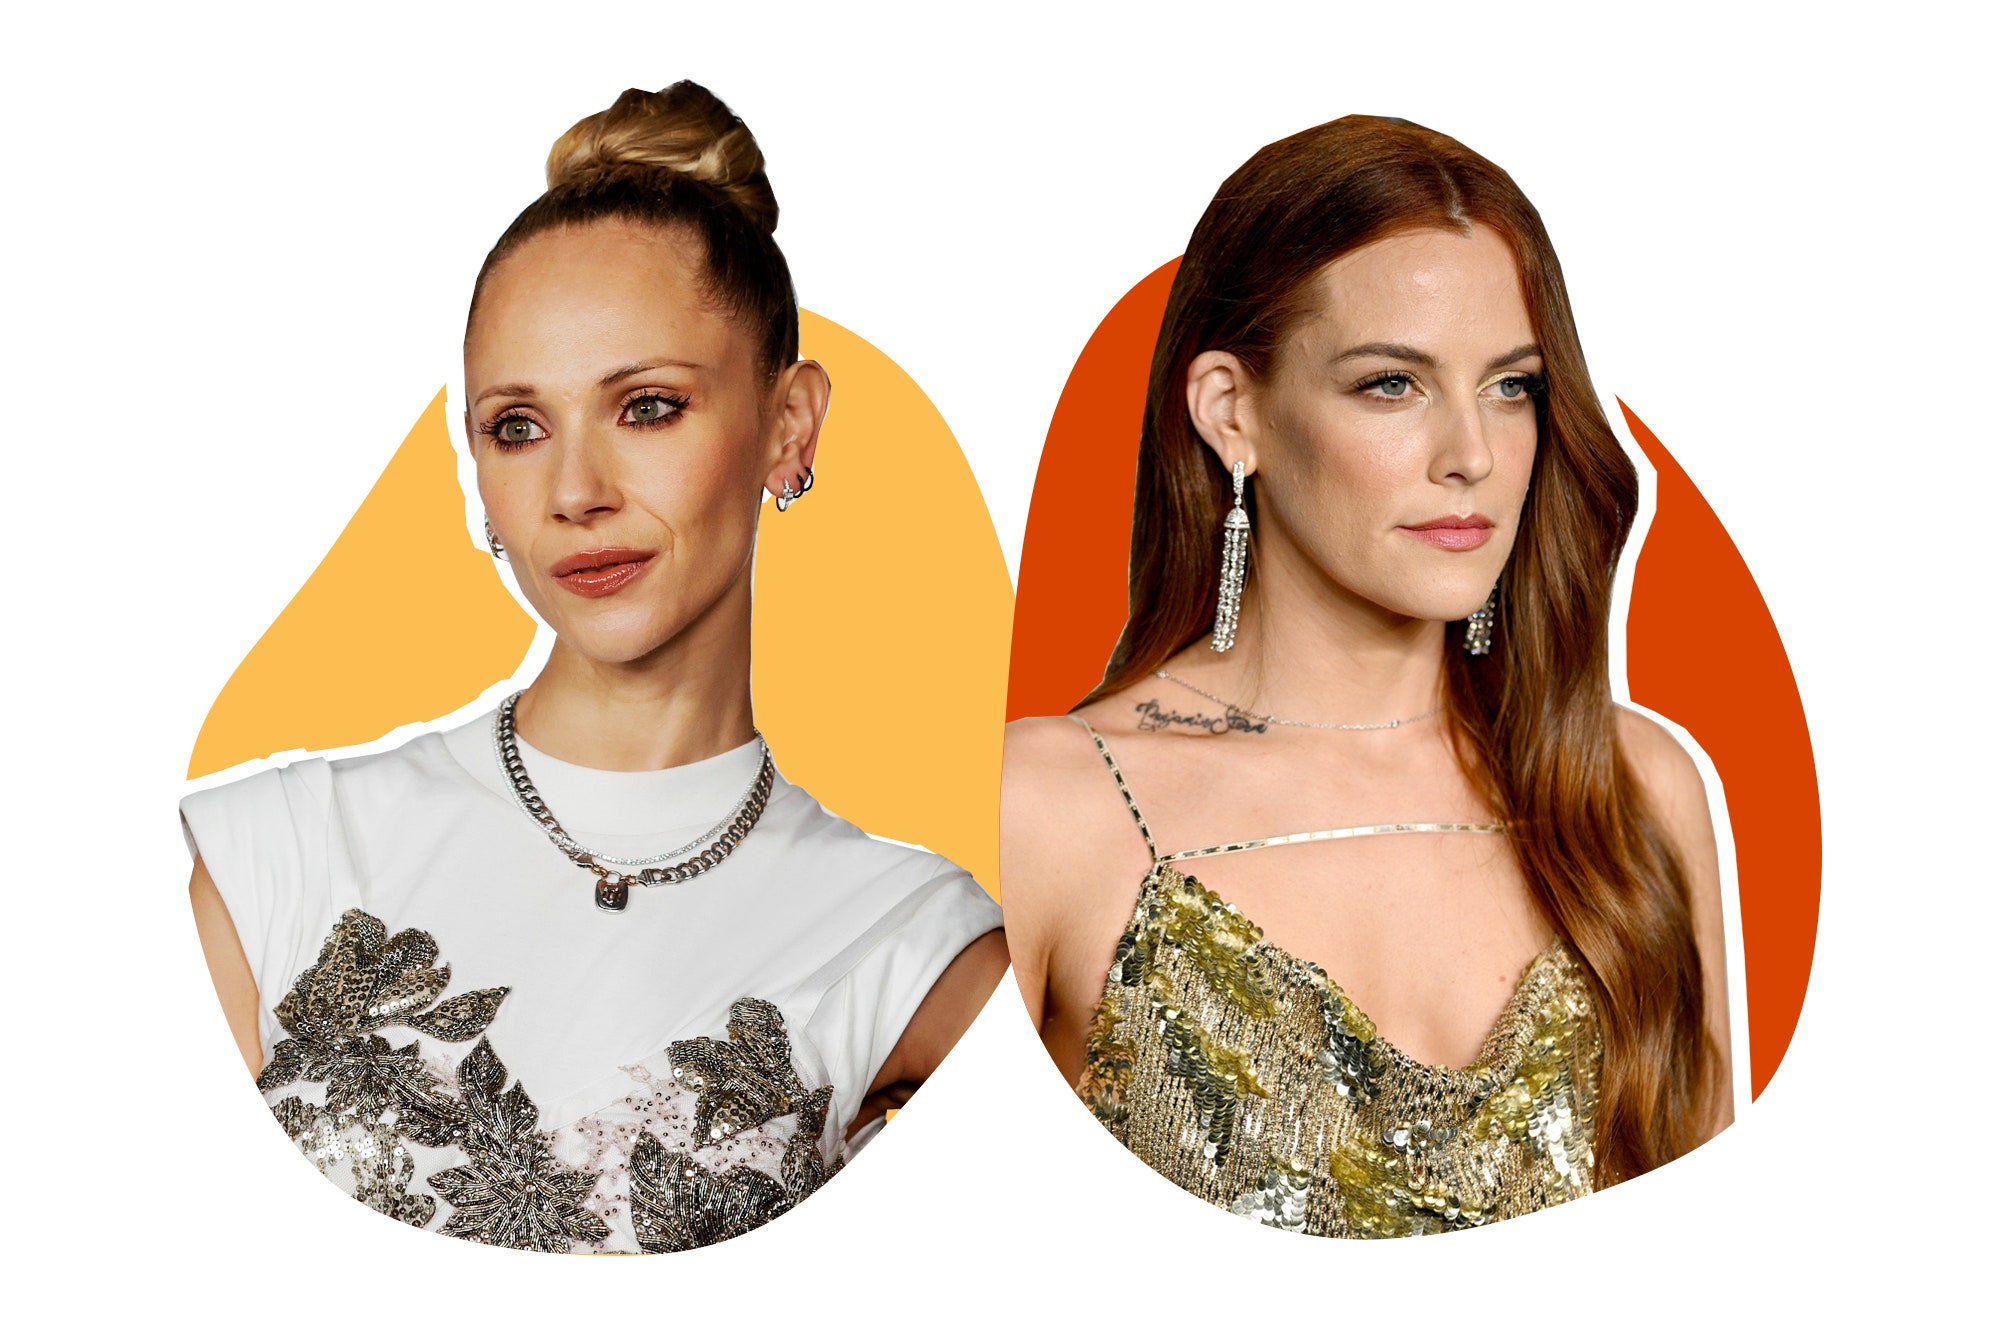 Juno Temple and Riley Keough on Growing Up But Remaining “Rising Stars”